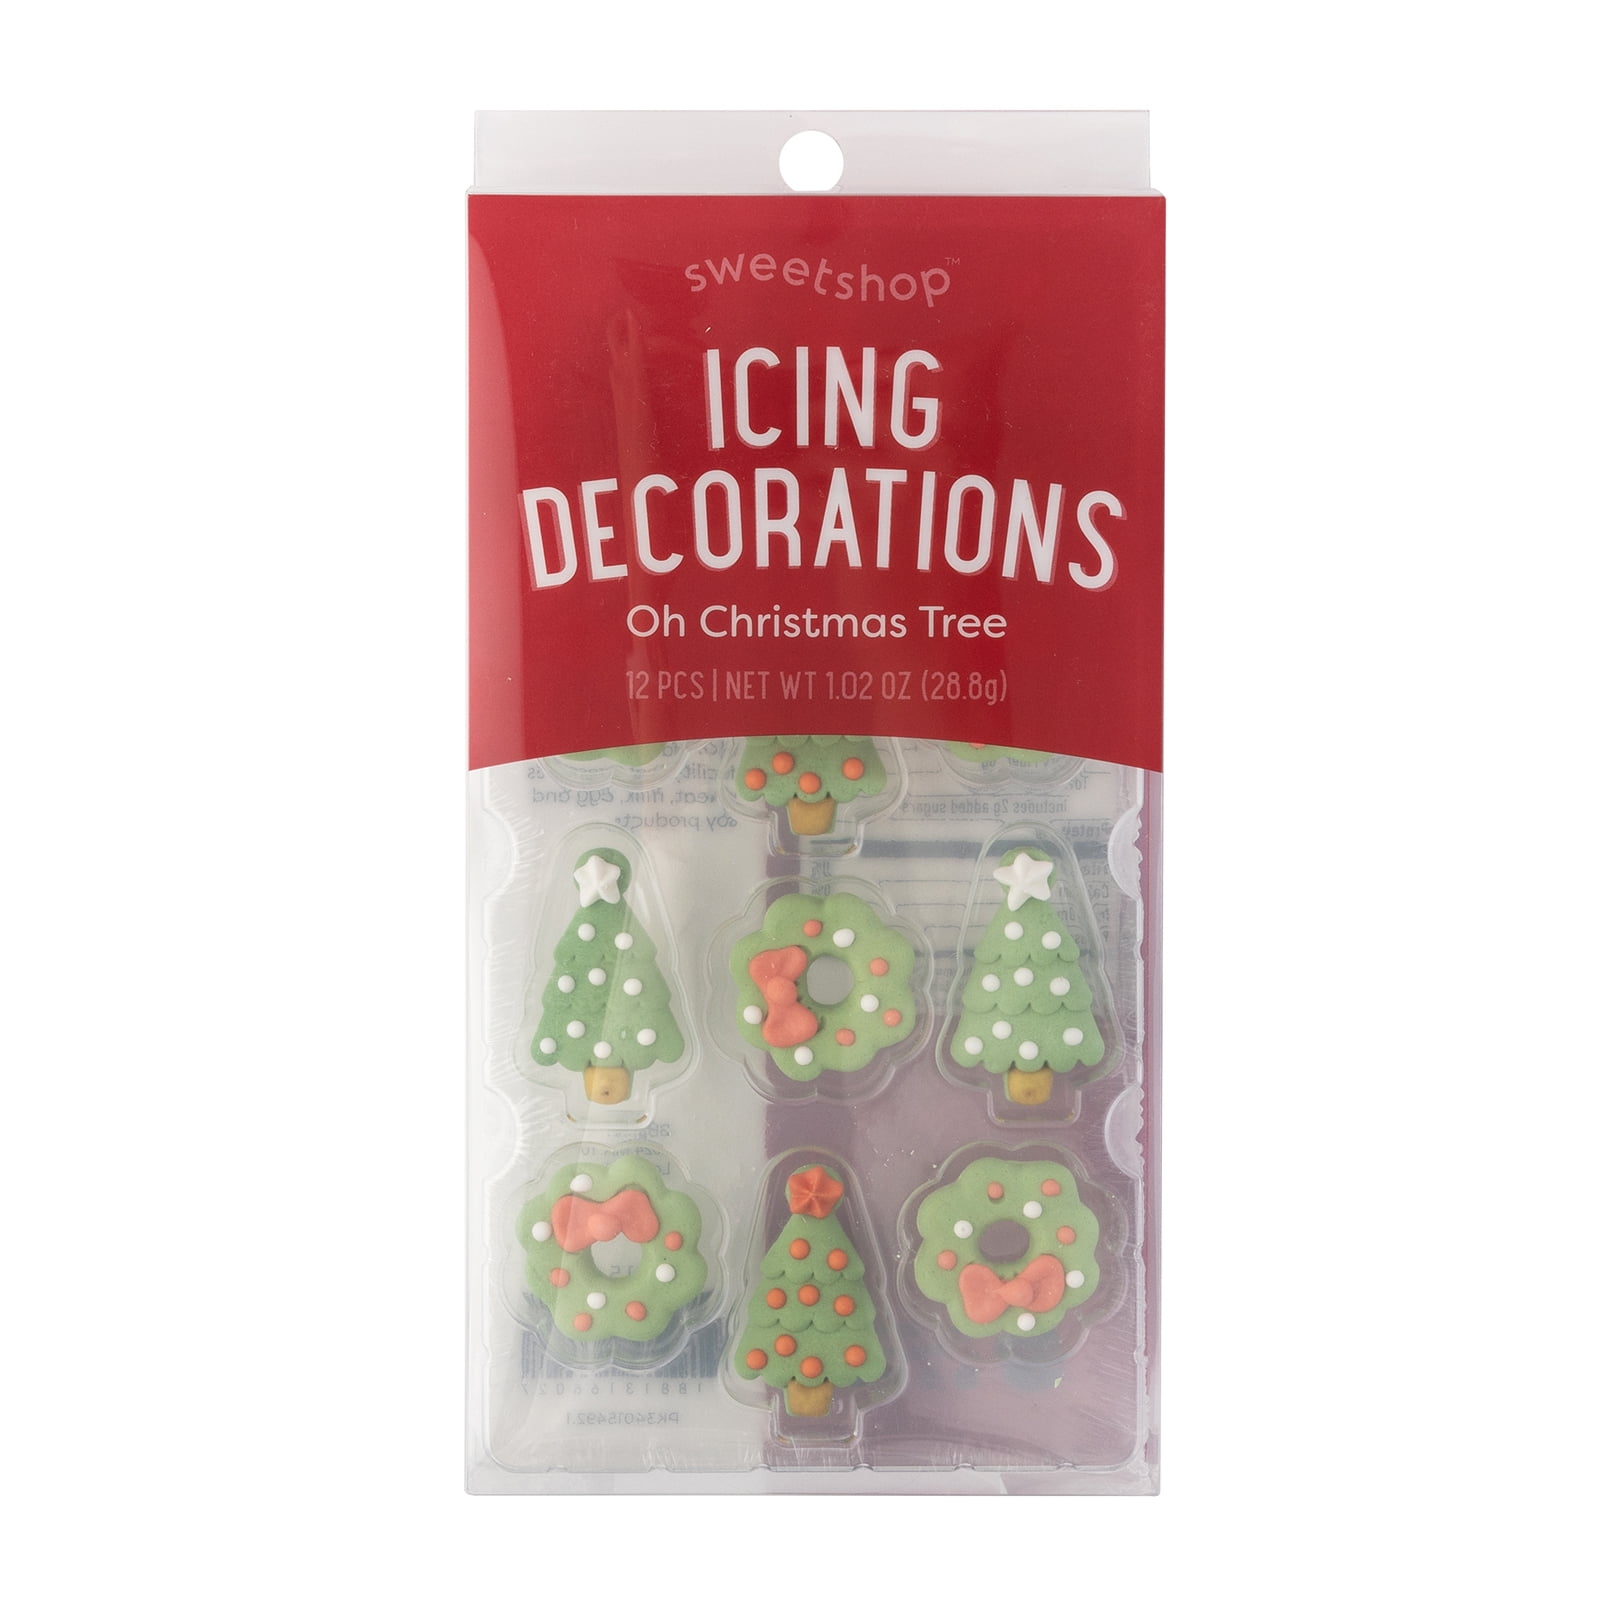 Sweetshop Holiday Icing Decorations, 12 Piece - Oh Christmas Tree Cake Toppers